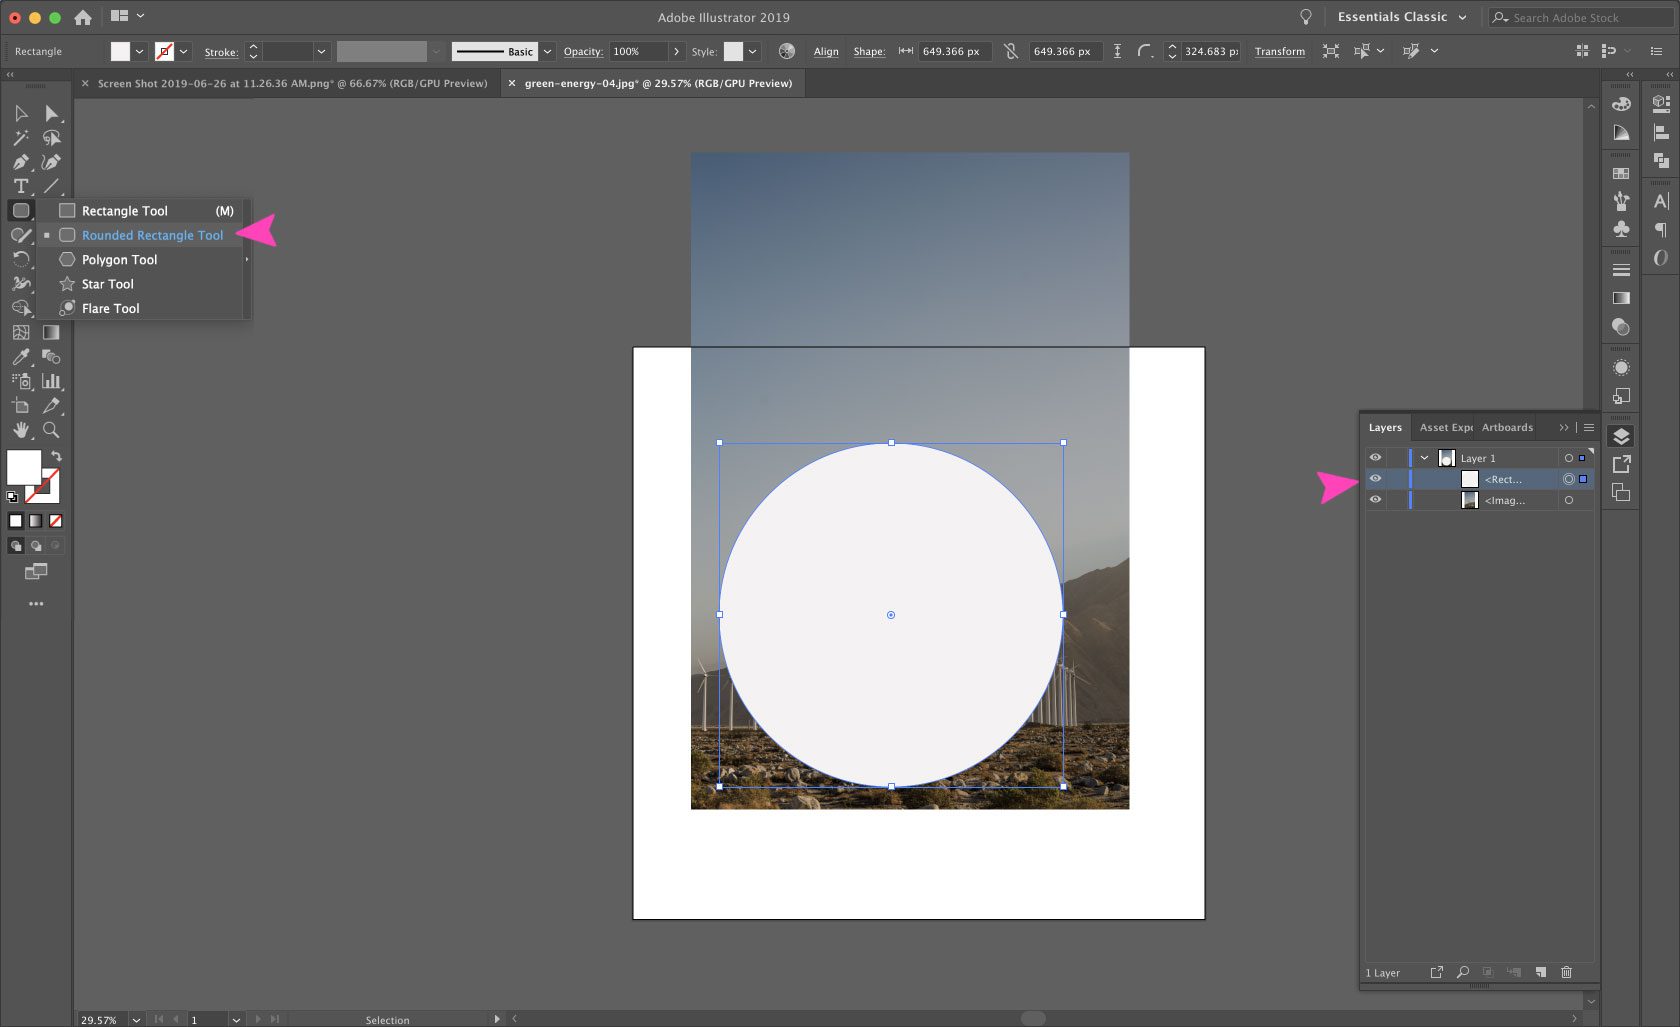 How To Crop An Image In Adobe Illustrator Cc Elegant Themes Blog